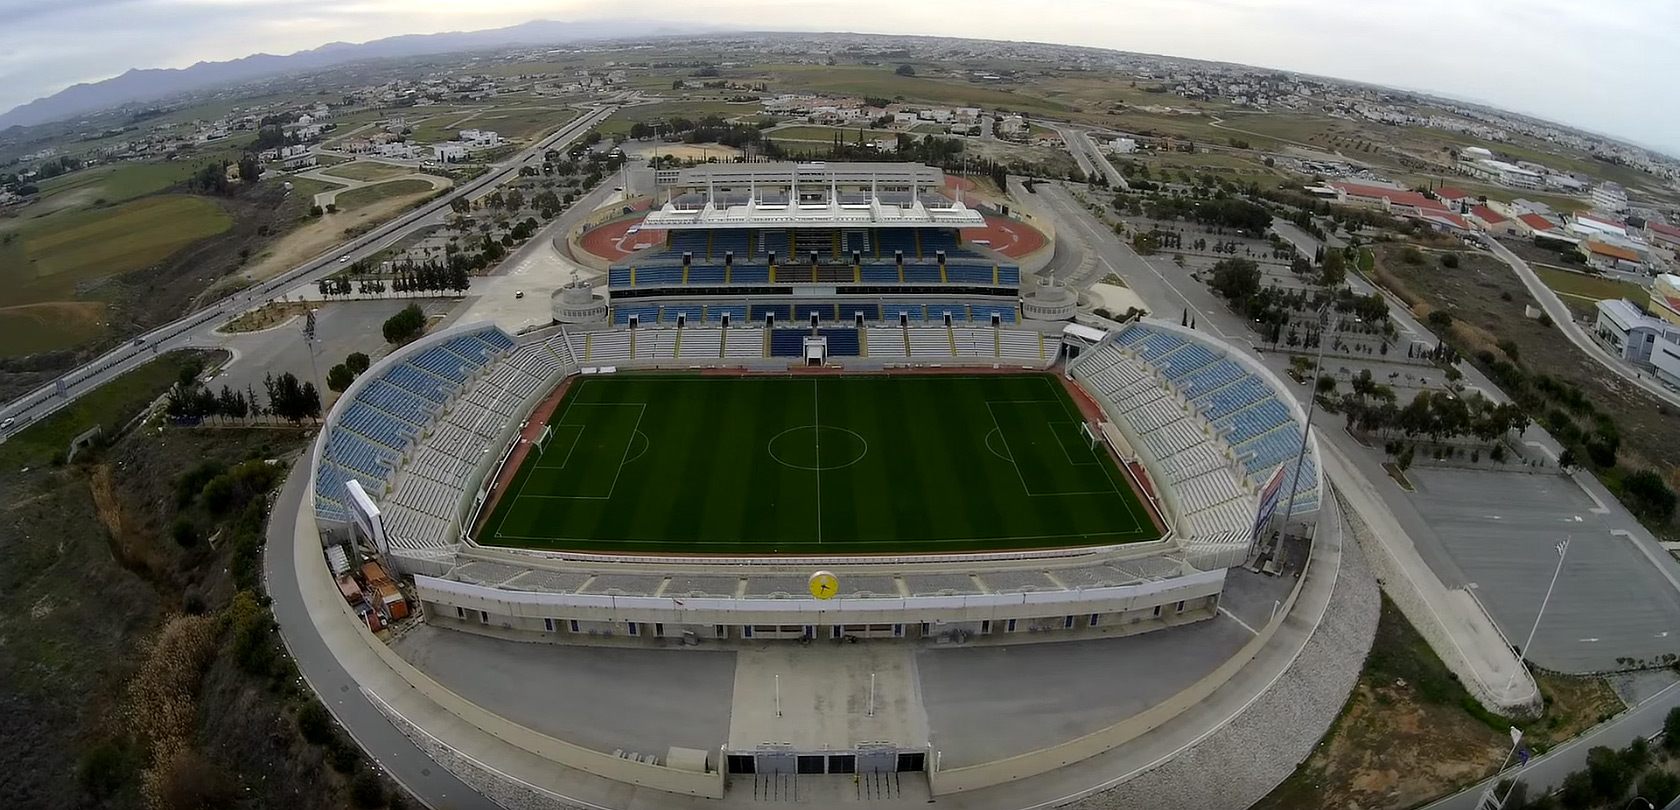 APOEL VS Real Madrid ( BETTING TIPS, Match Preview & Expert Analysis )